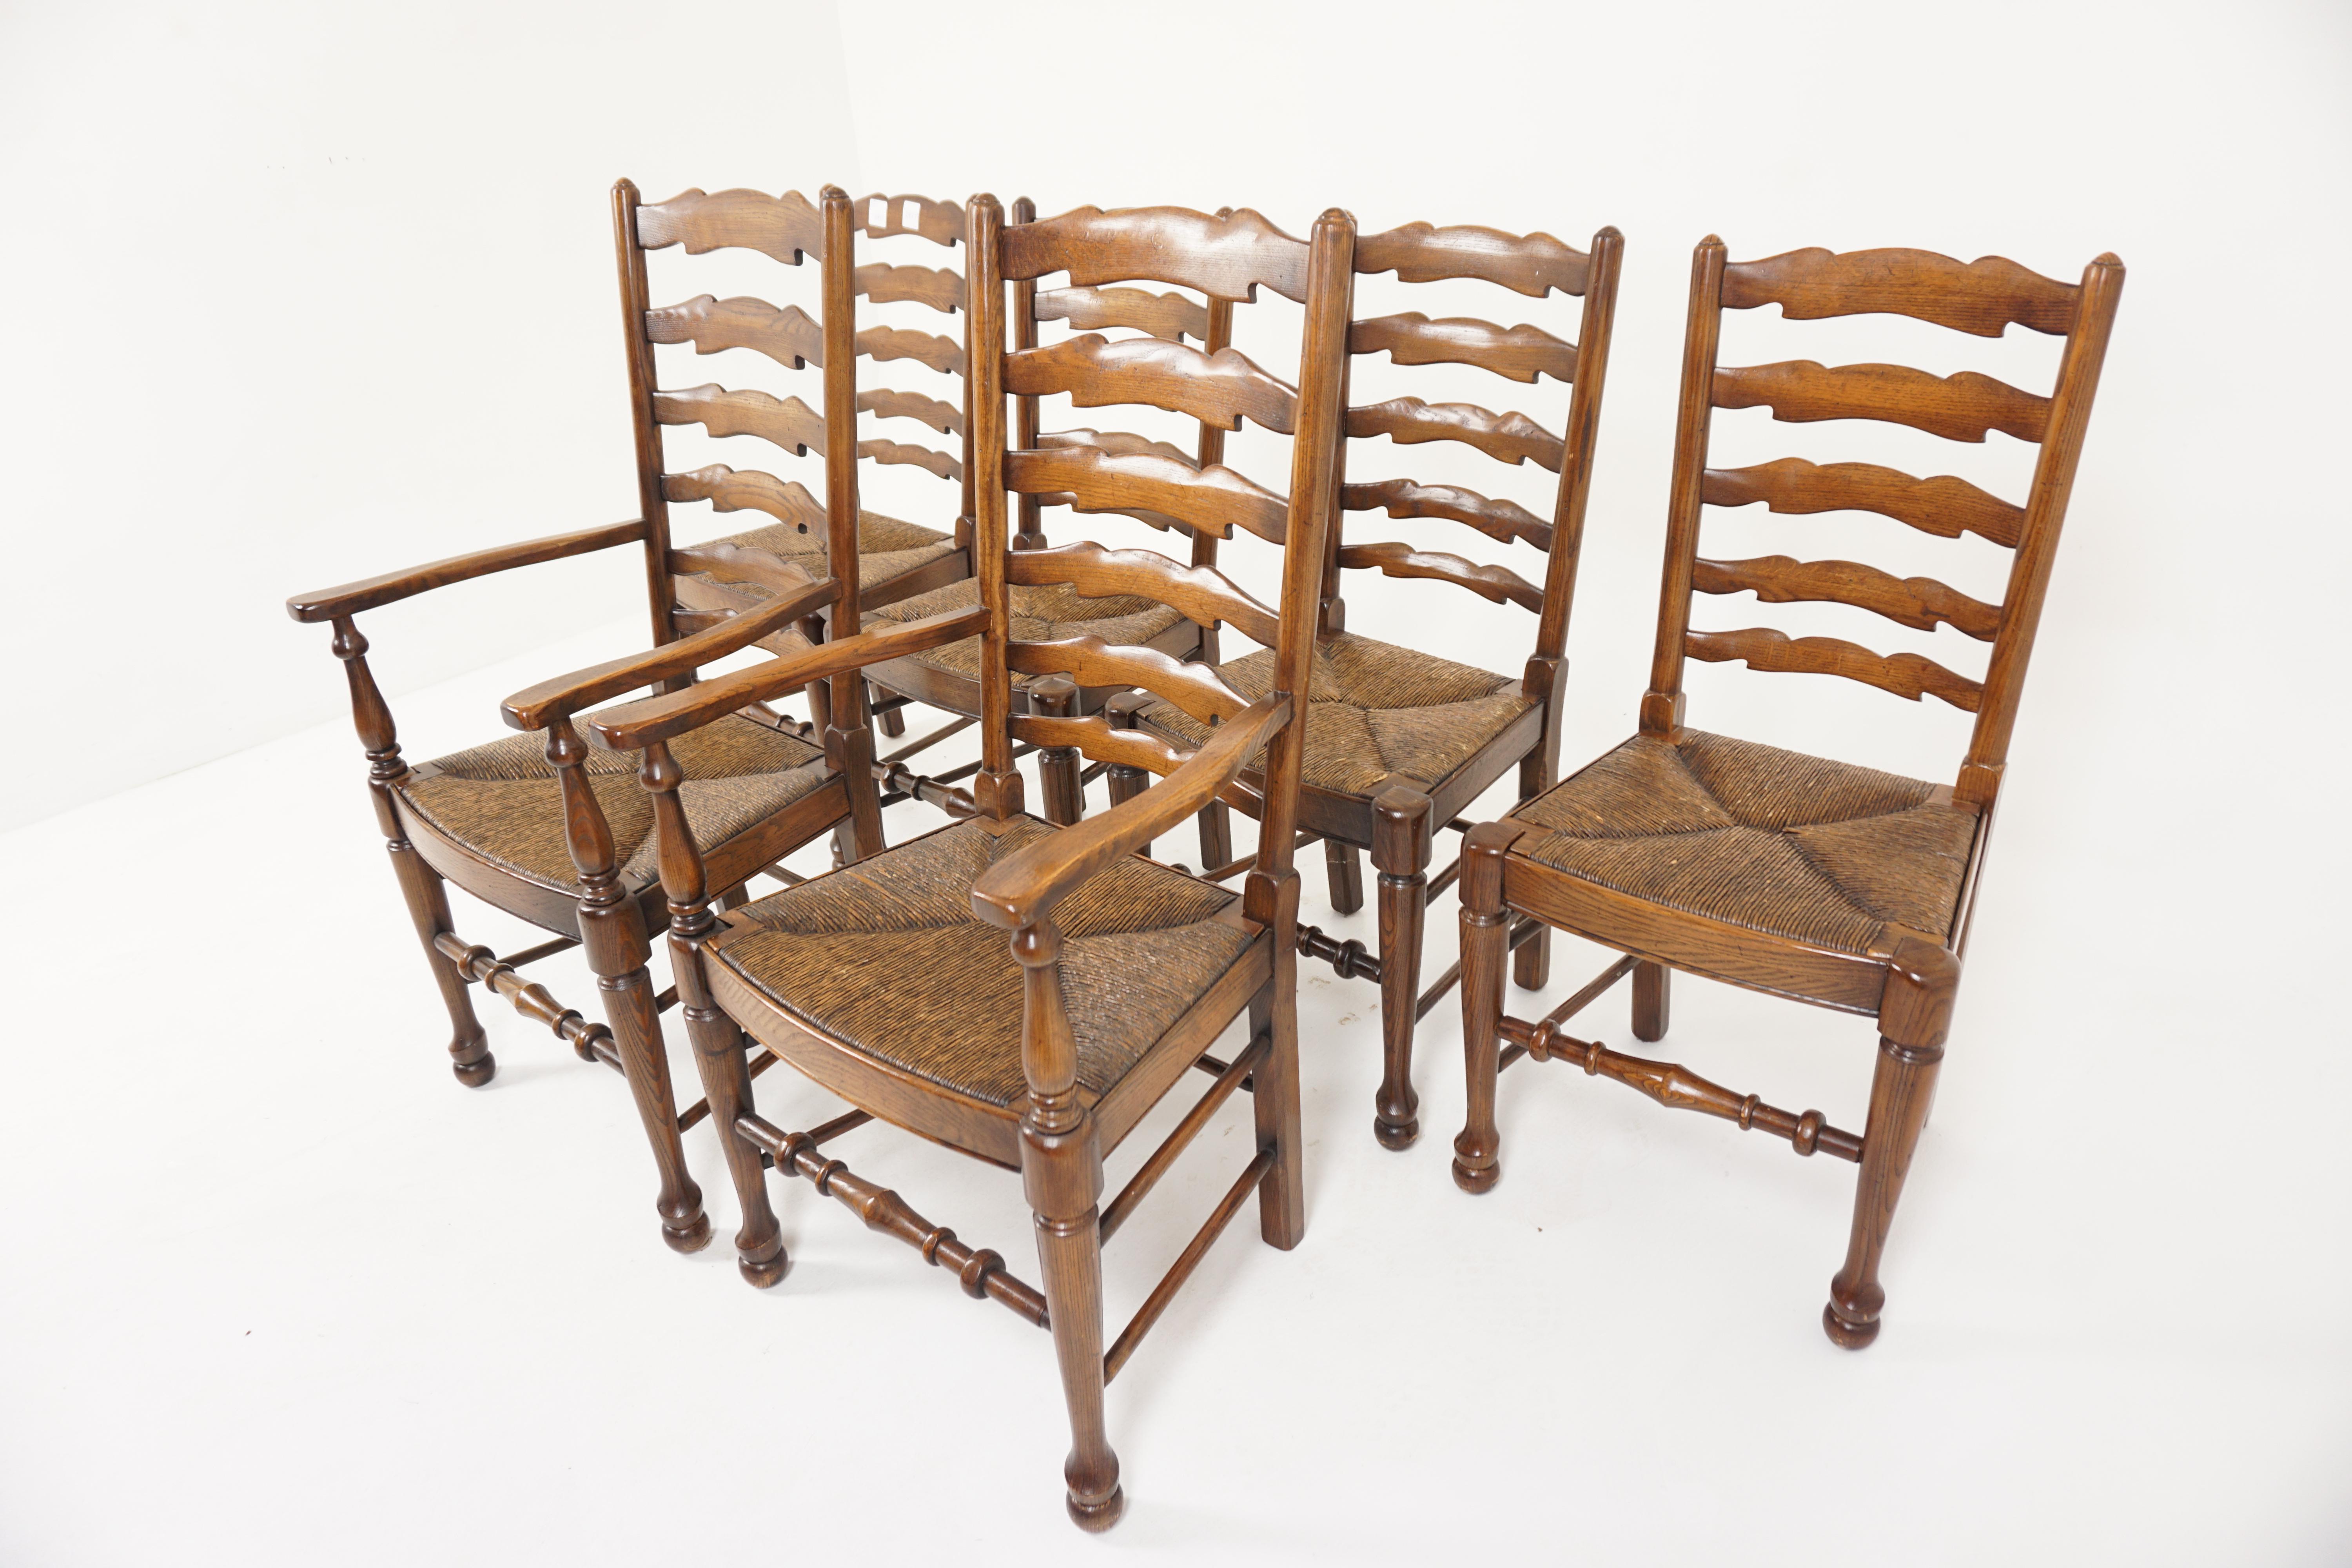 Vintage 6 oak ladder back rush seat chairs 4+2, Scotland 1940, B2937

Scotland 1940 
Solid oak 
Original finish
Five ladder back shaped rails to the back
Original rush seats
All standing on turned legs to the front with pod feet
Connected by